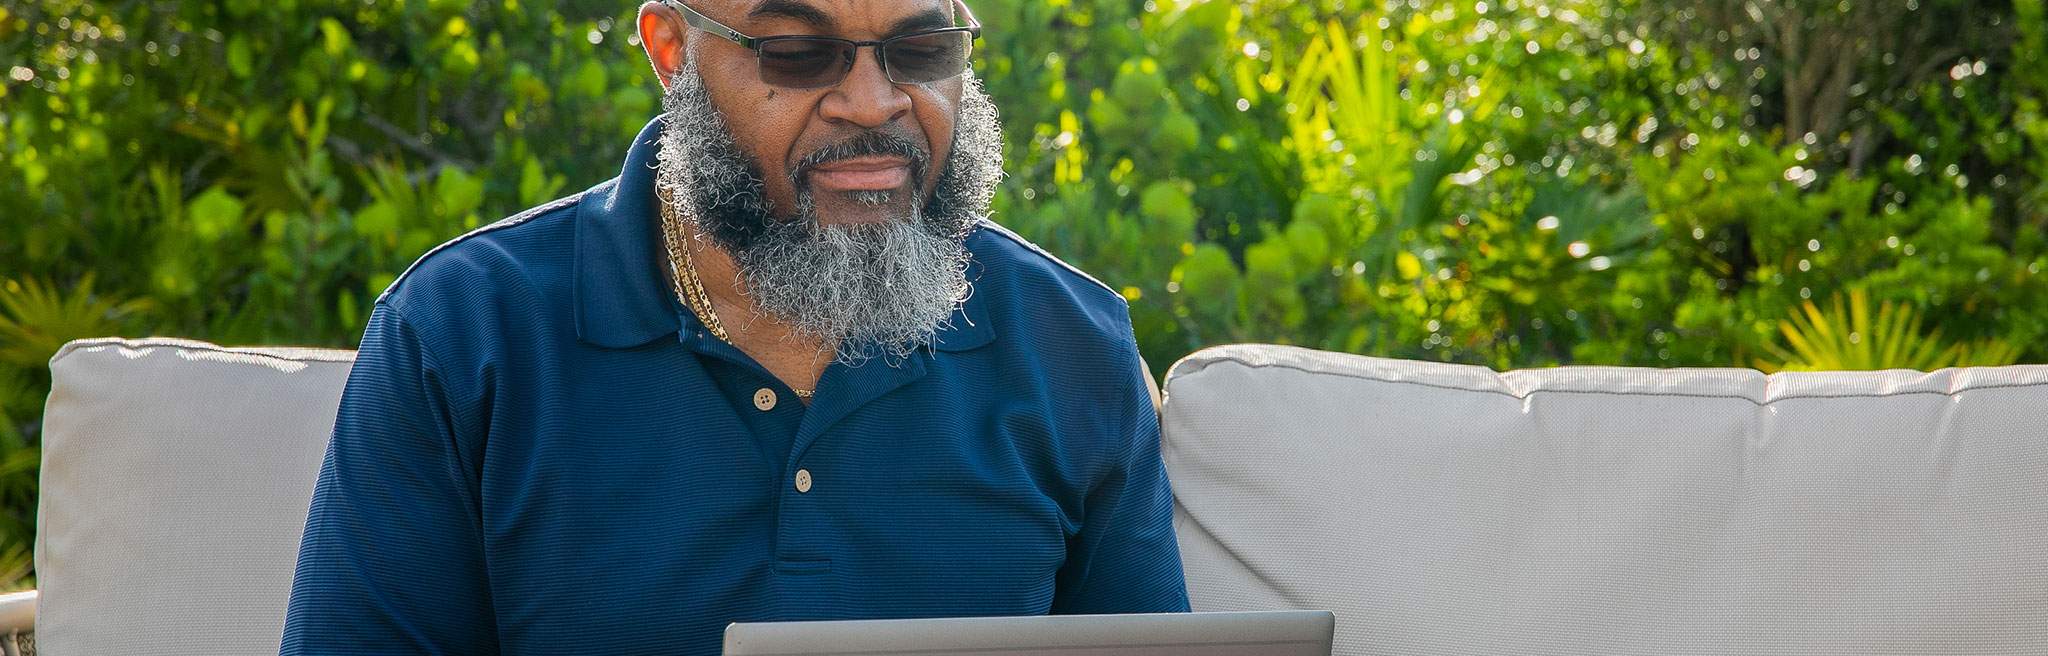 man with sunglasses using a laptop